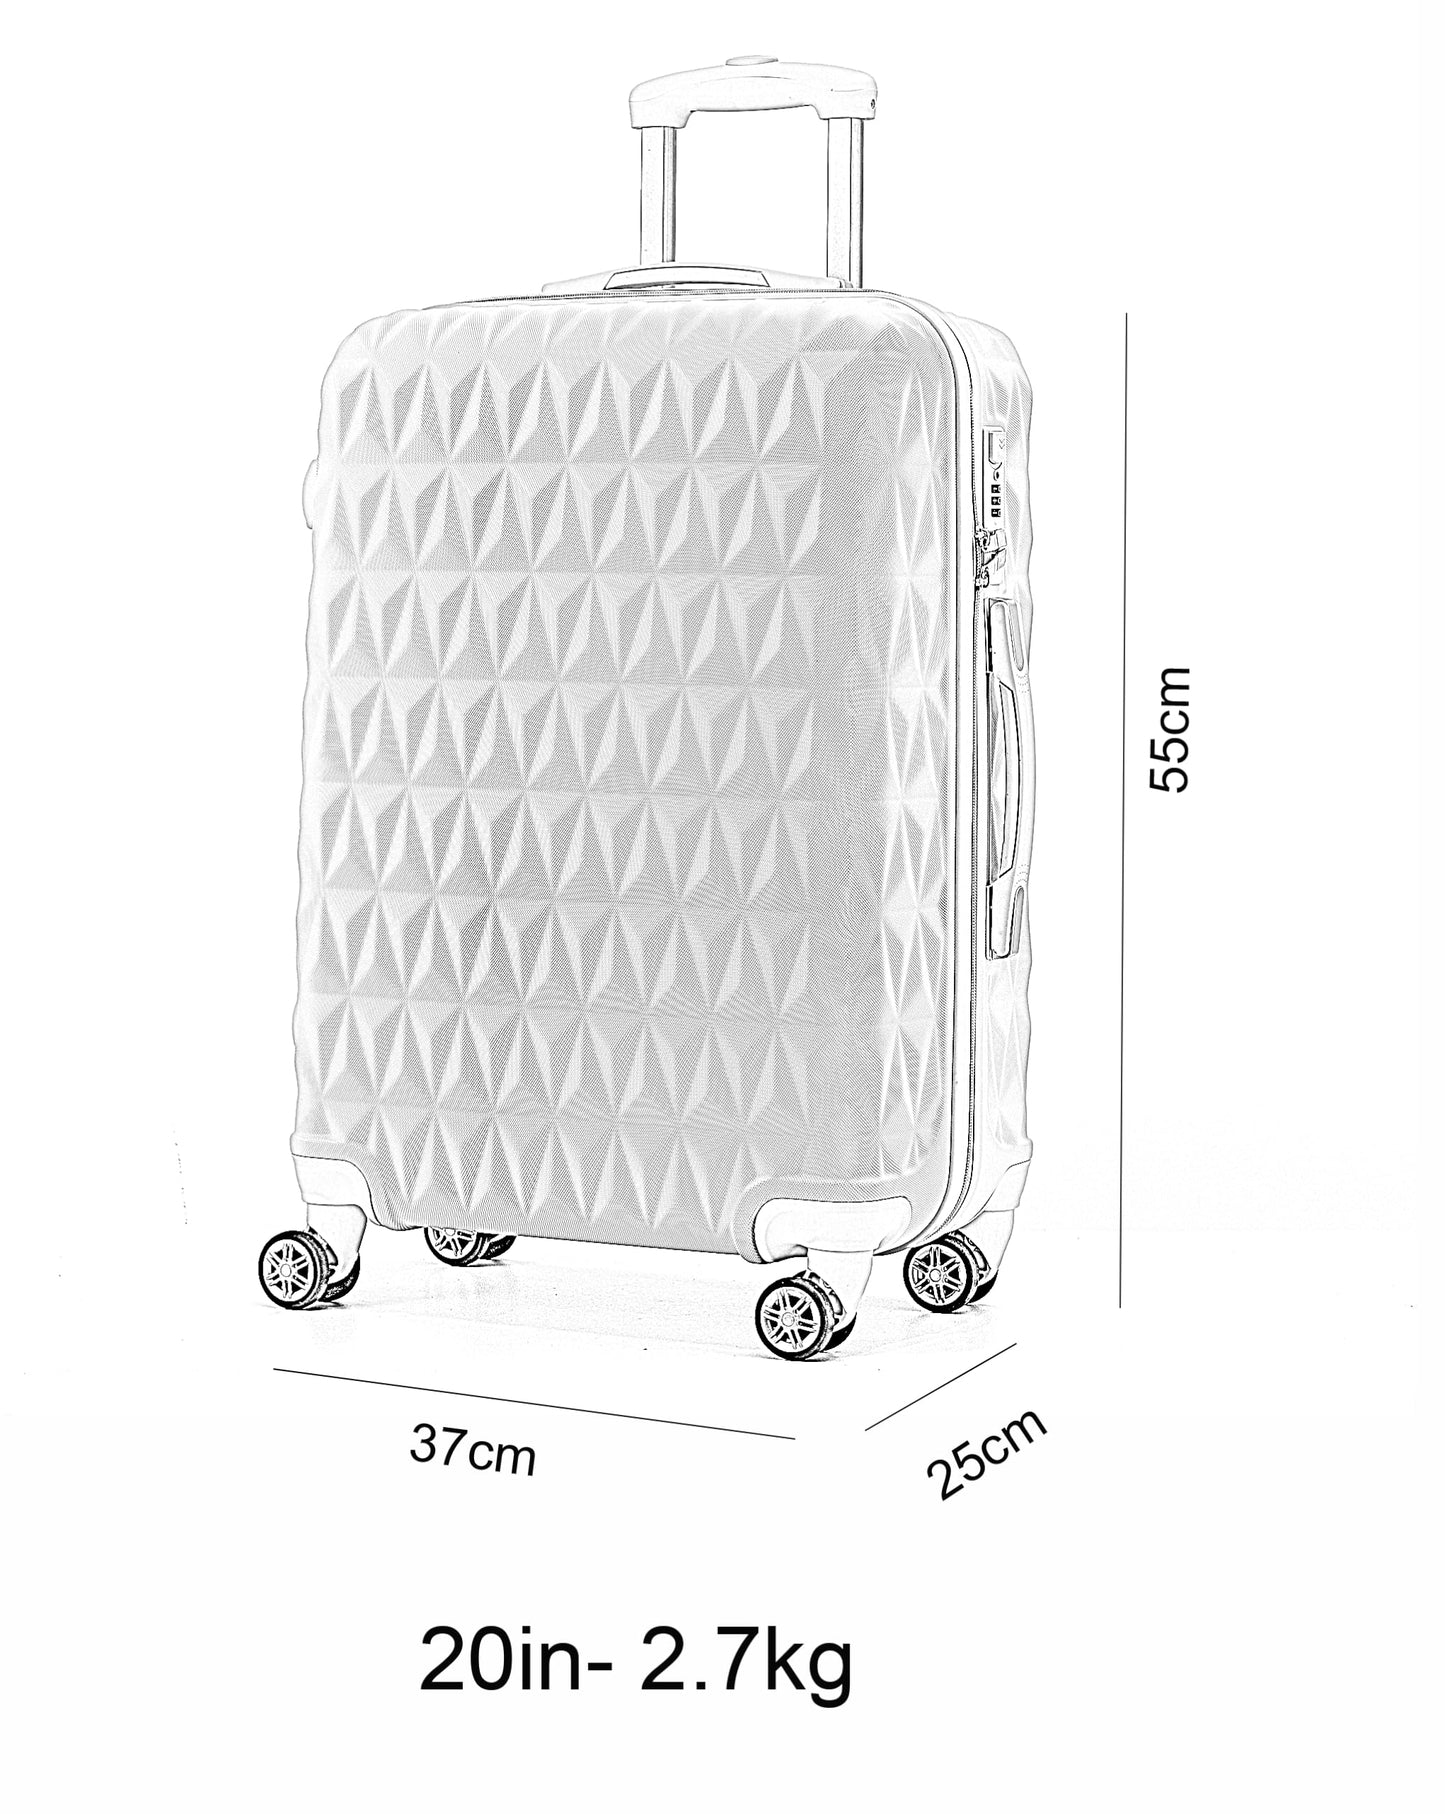 Hard Shell Cabin Carry On Suitcase 55 cm 2.5 kg 35 litres 4 Wheels with Built in 3 Digit Combination Lock, Approved for Ryanair, easyJet, British Airways & More (Black)